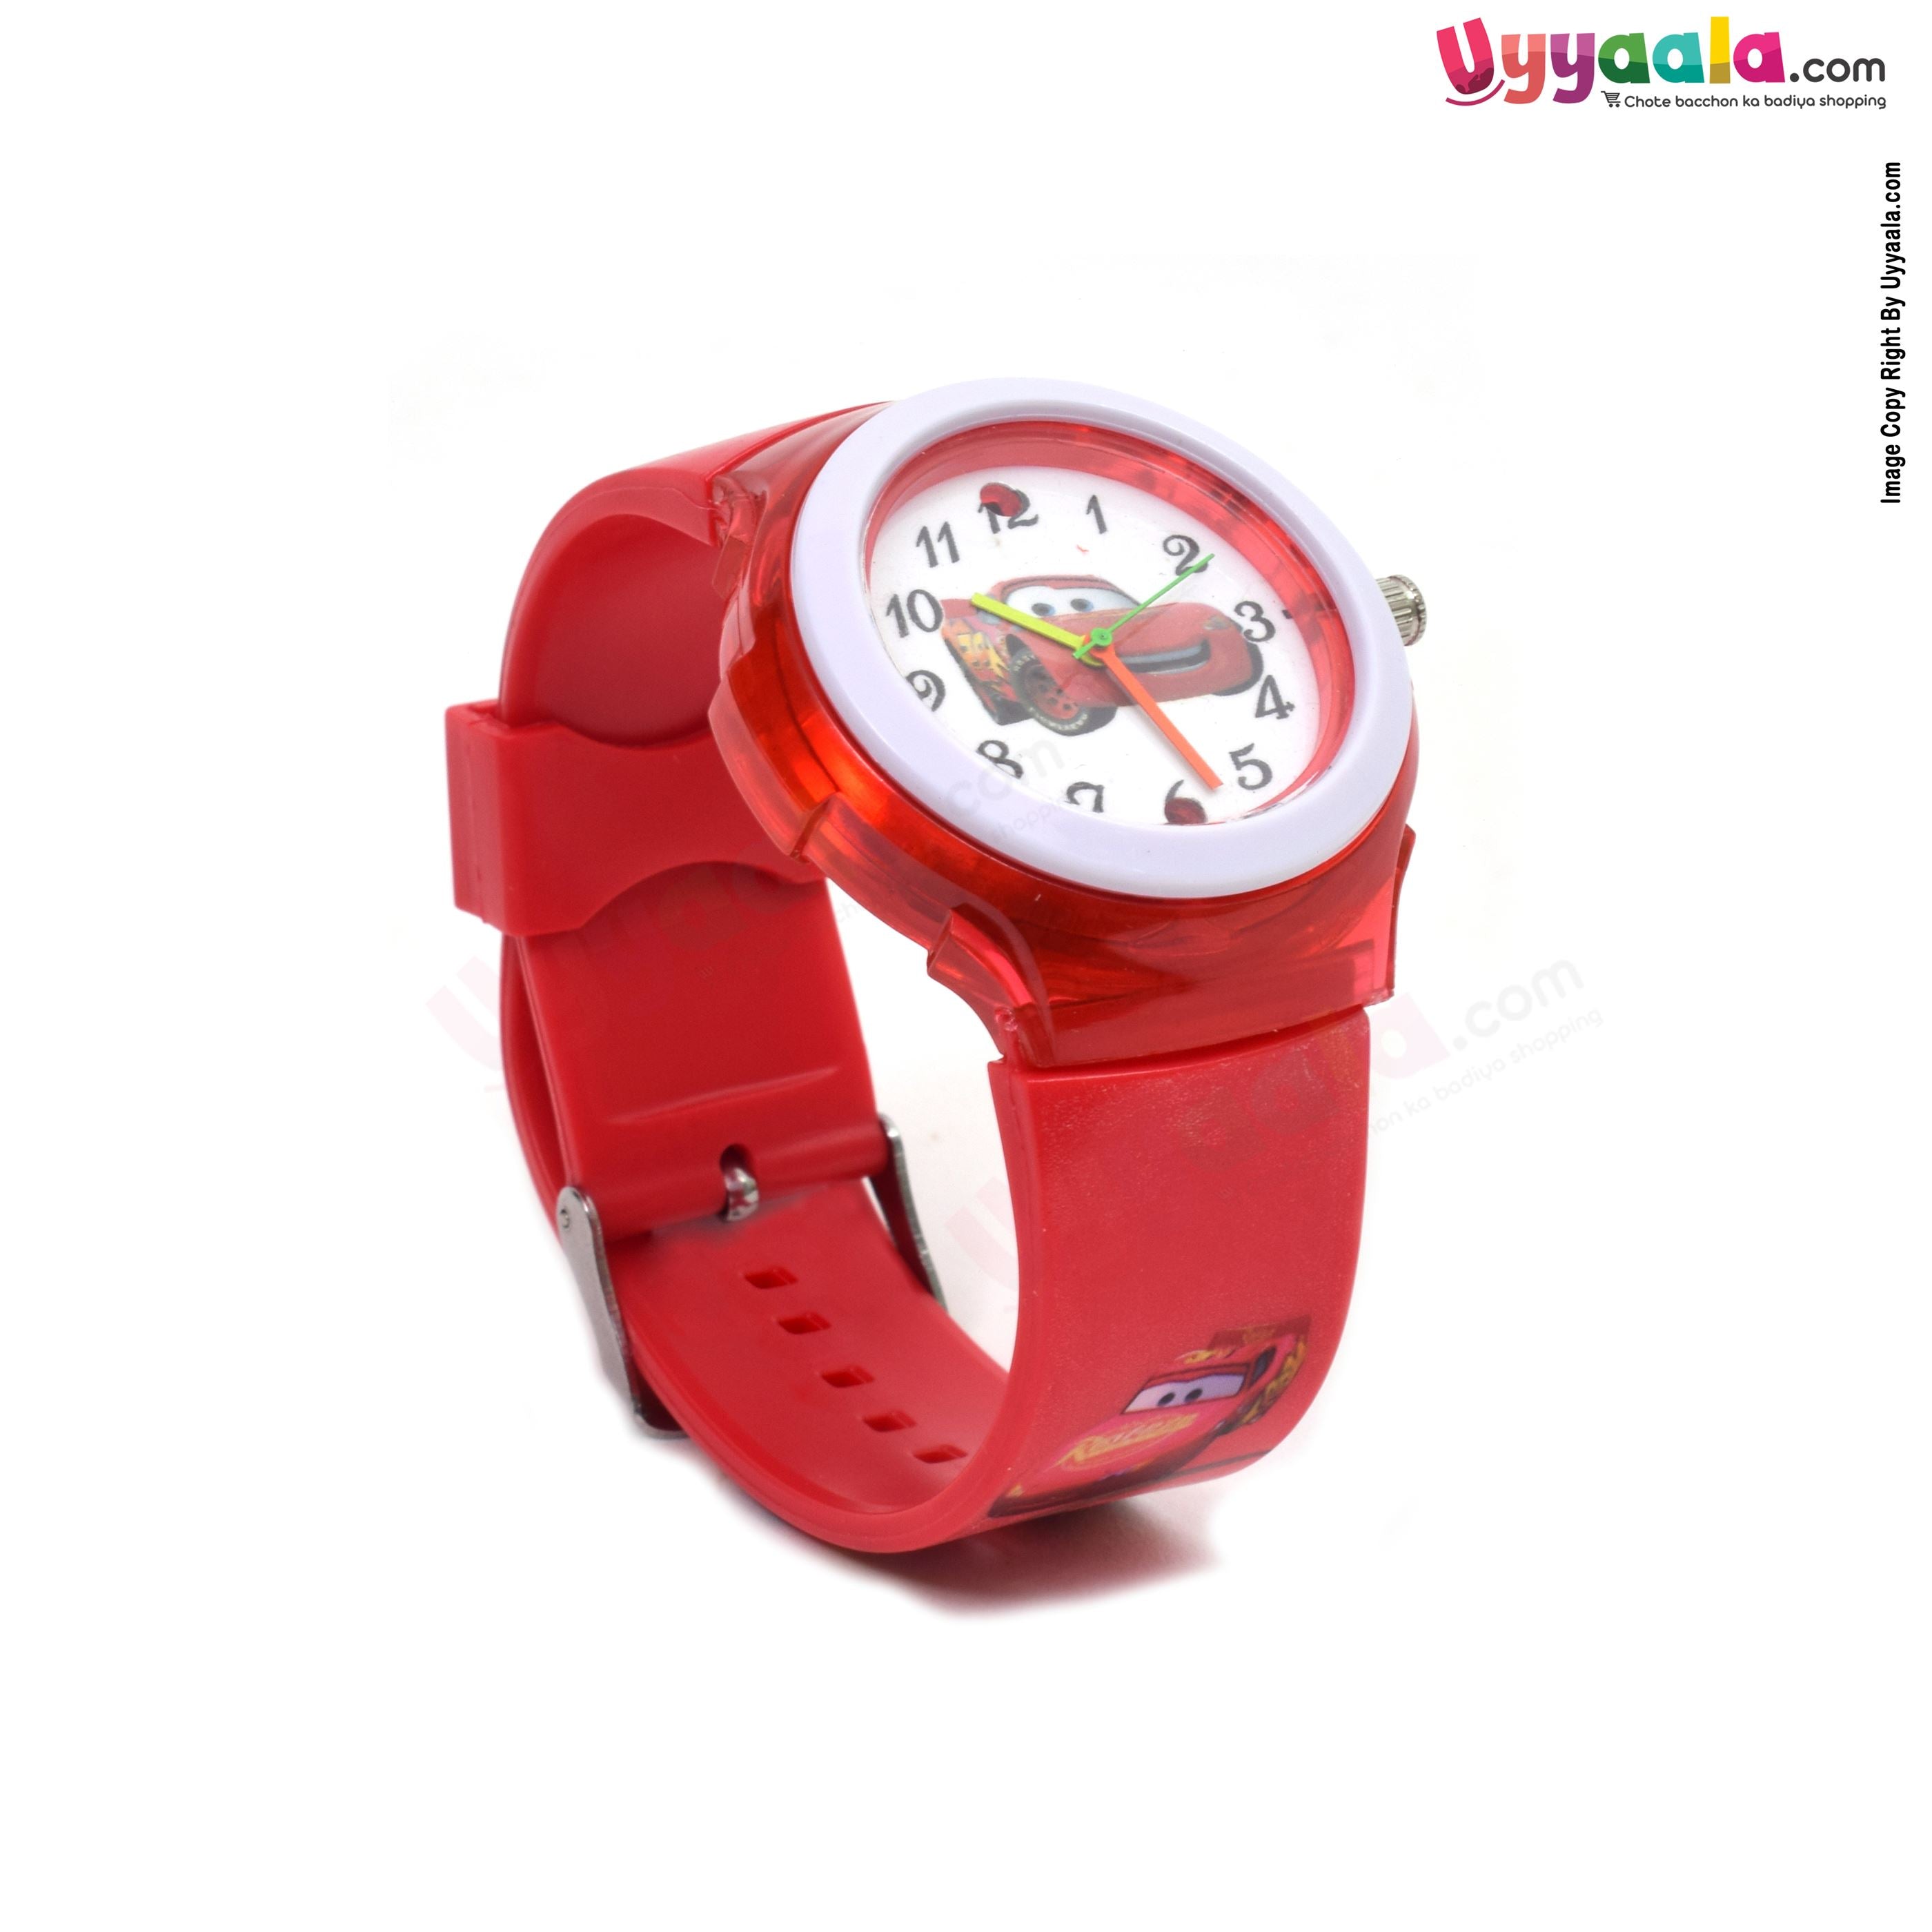 Disneys Cars analog watch with for kids - red strap with cars print